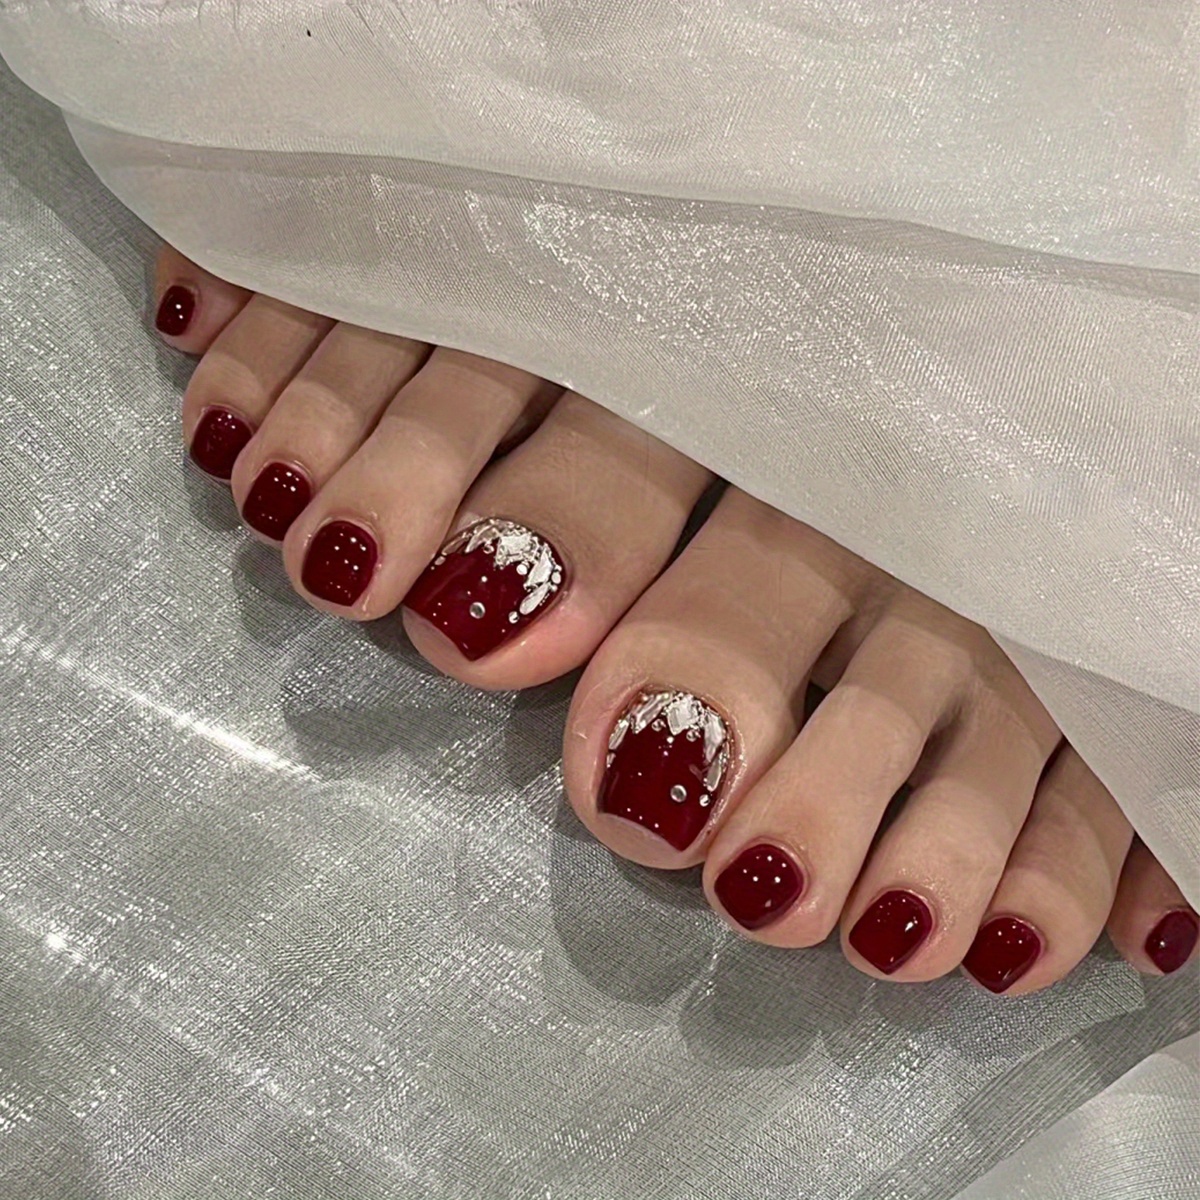 The Nail Company Liverpool - #red #rednails #polish #opi #diamante #gems  #design #square #nails #liverpoolnails #liverpoolsalons #thenailcompany  #liverpool #tuebrook #westderby #westderbyroad